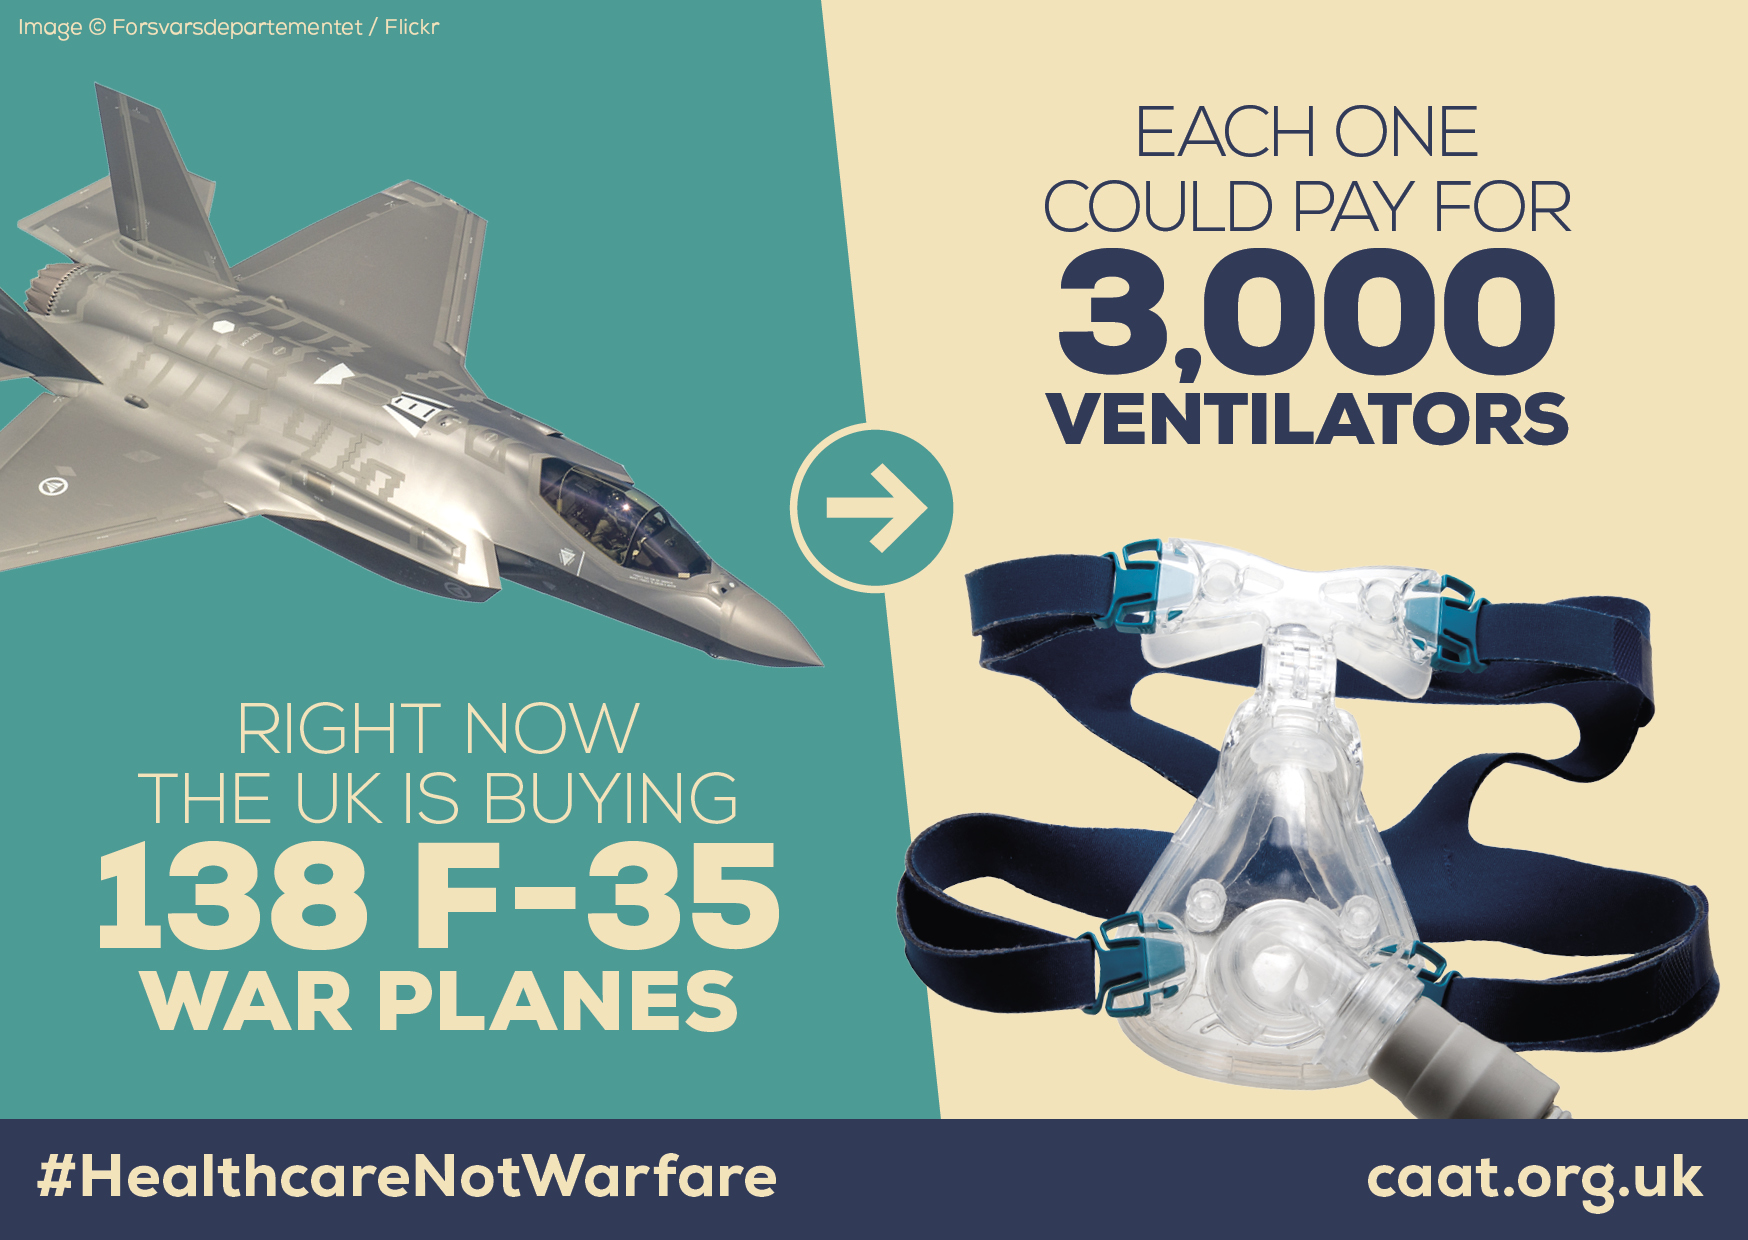 teal and yellow image with fighter jet and ventilator and text reads 'right now the uk is buying 138 F-35 war planes which could pay for 3,000 ventilators'